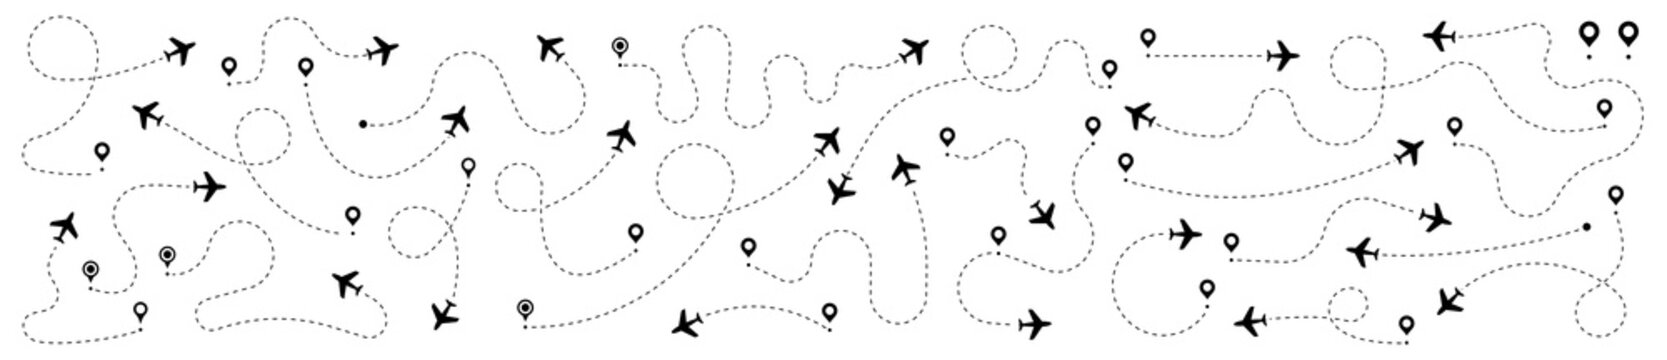 Airplane routes set. Plane route line. Planes dotted flight pathway. Plane paths. Aircraft tracking, planes, travel, map pins, location pins. Romantic travel, heart dashed line trace and plane routes.